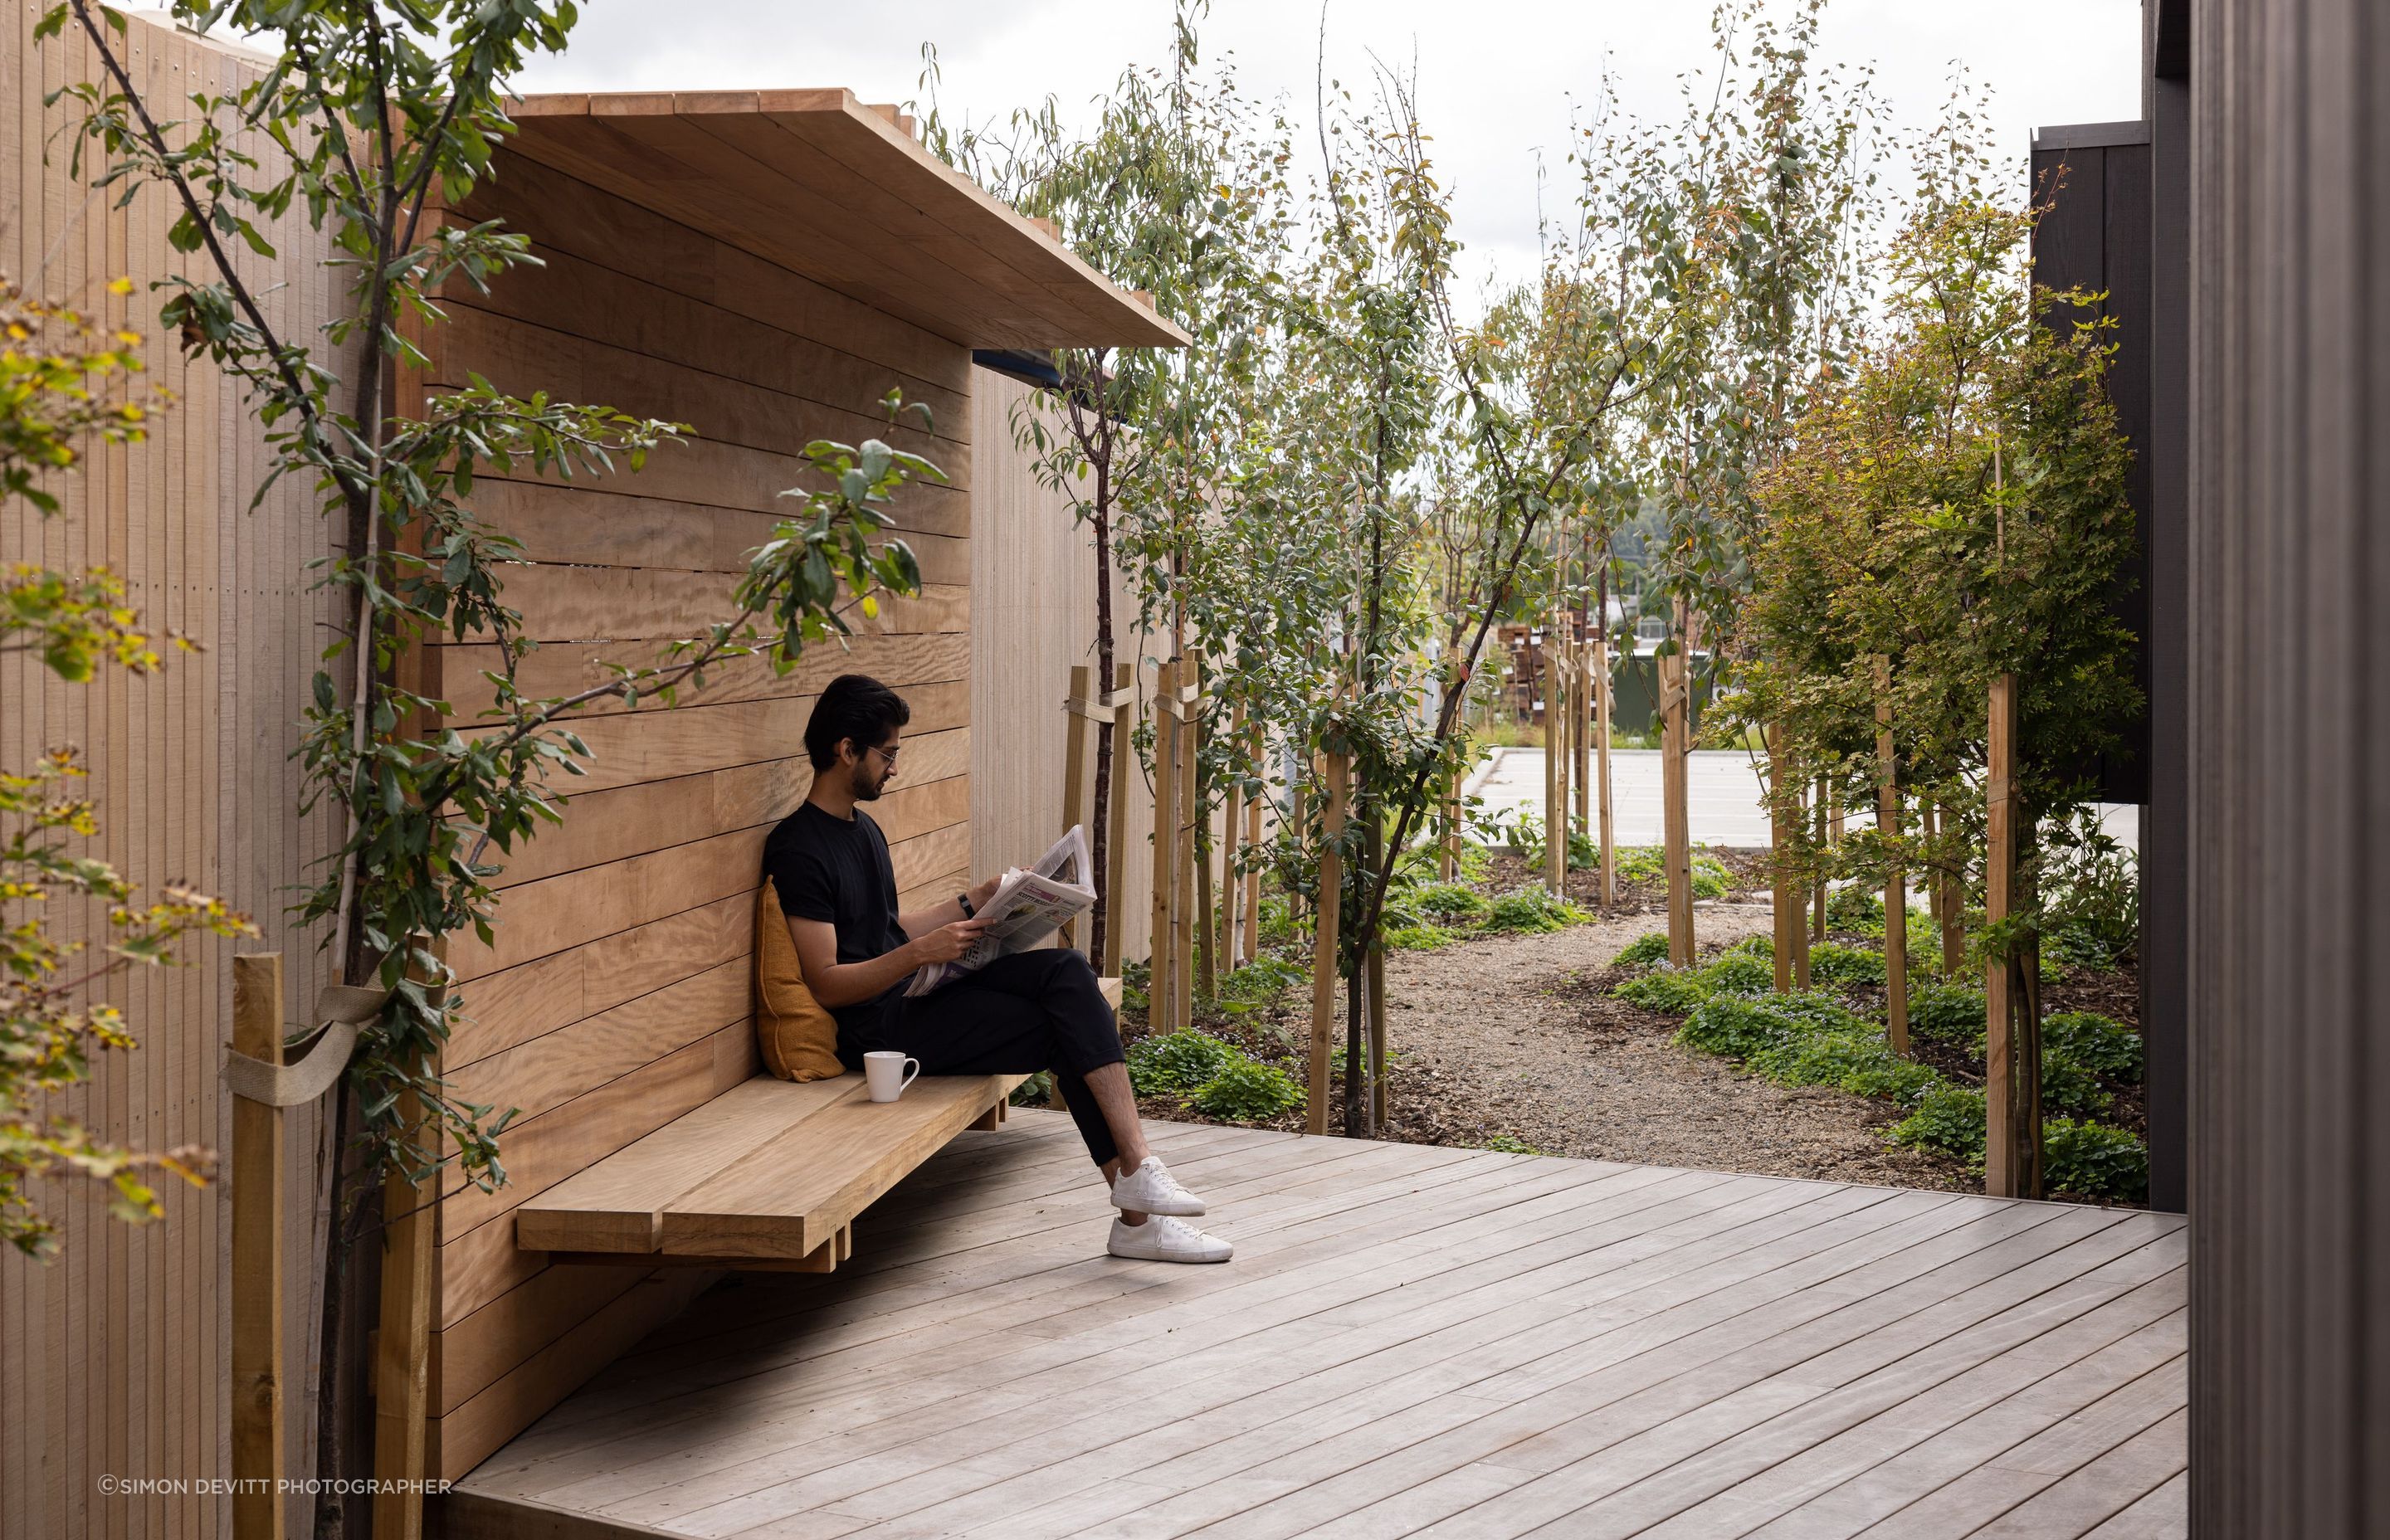 Large overhanging eaves on the building provide options for employees if they’re not sitting in the sun. “The landscape also introduces fruit trees, which adds another layer of staff wellbeing.”